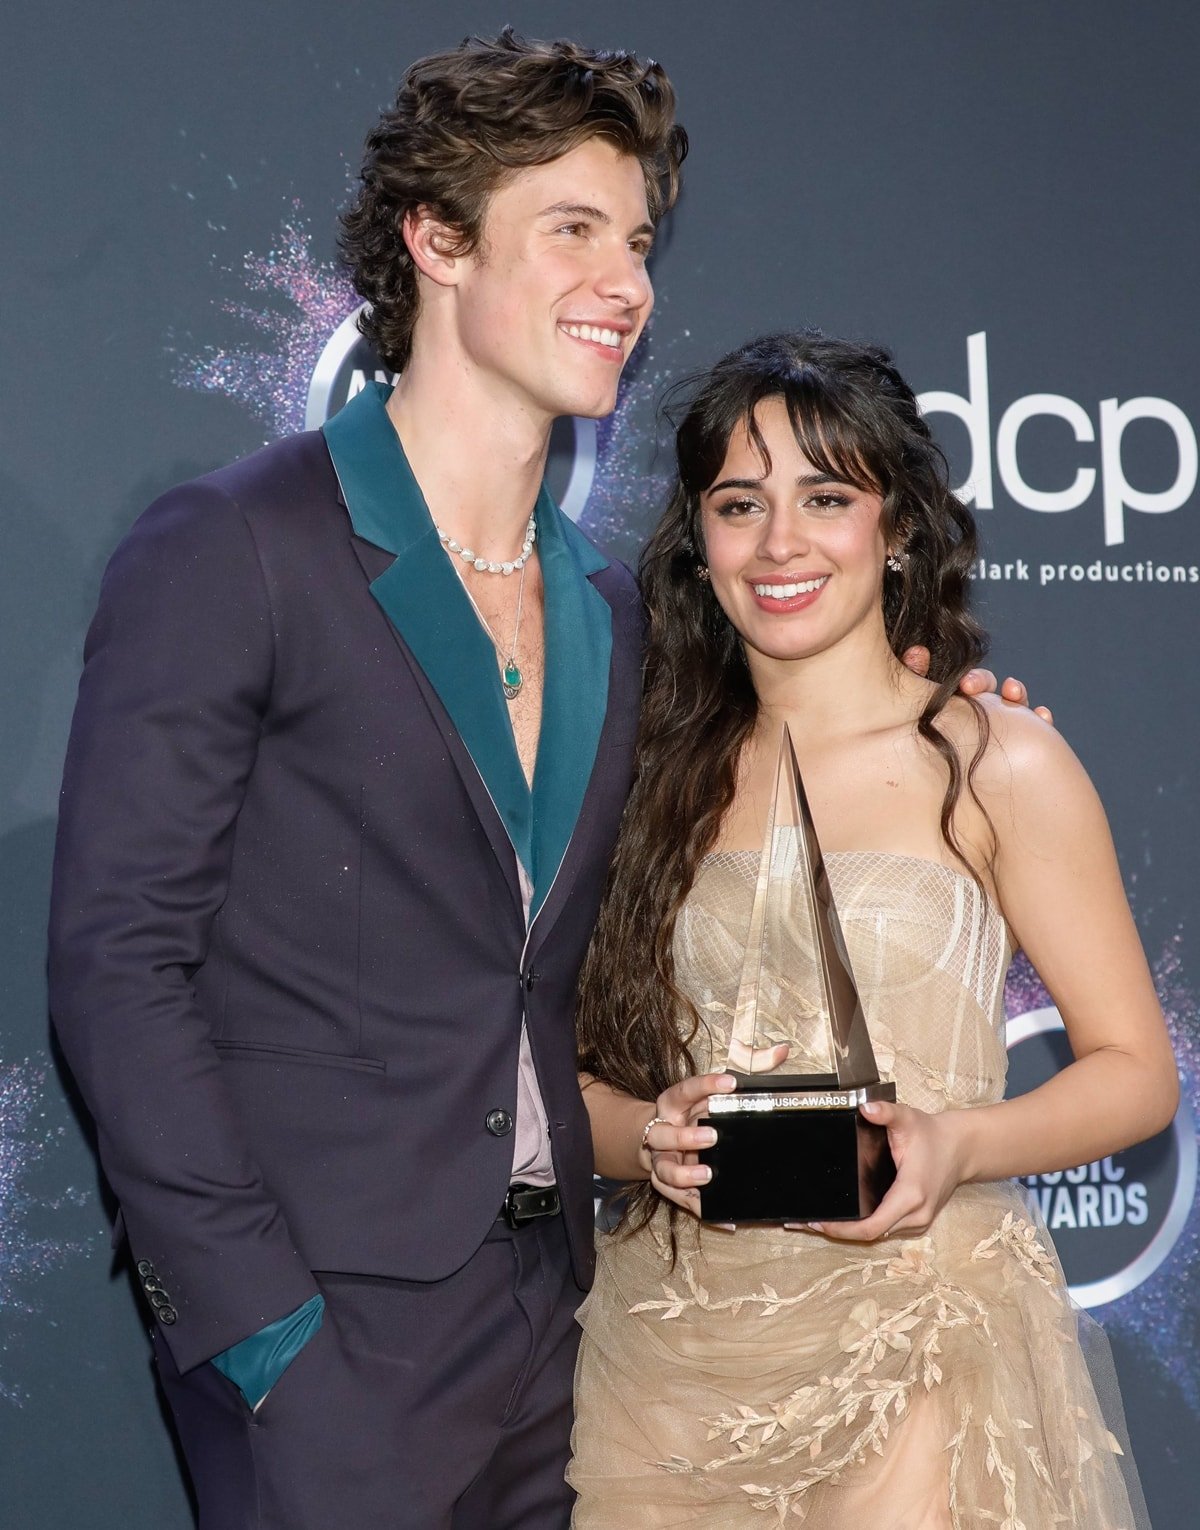 Shawn Mendes with his much shorter girlfriend Camila Cabello at the 2019 American Music Awards